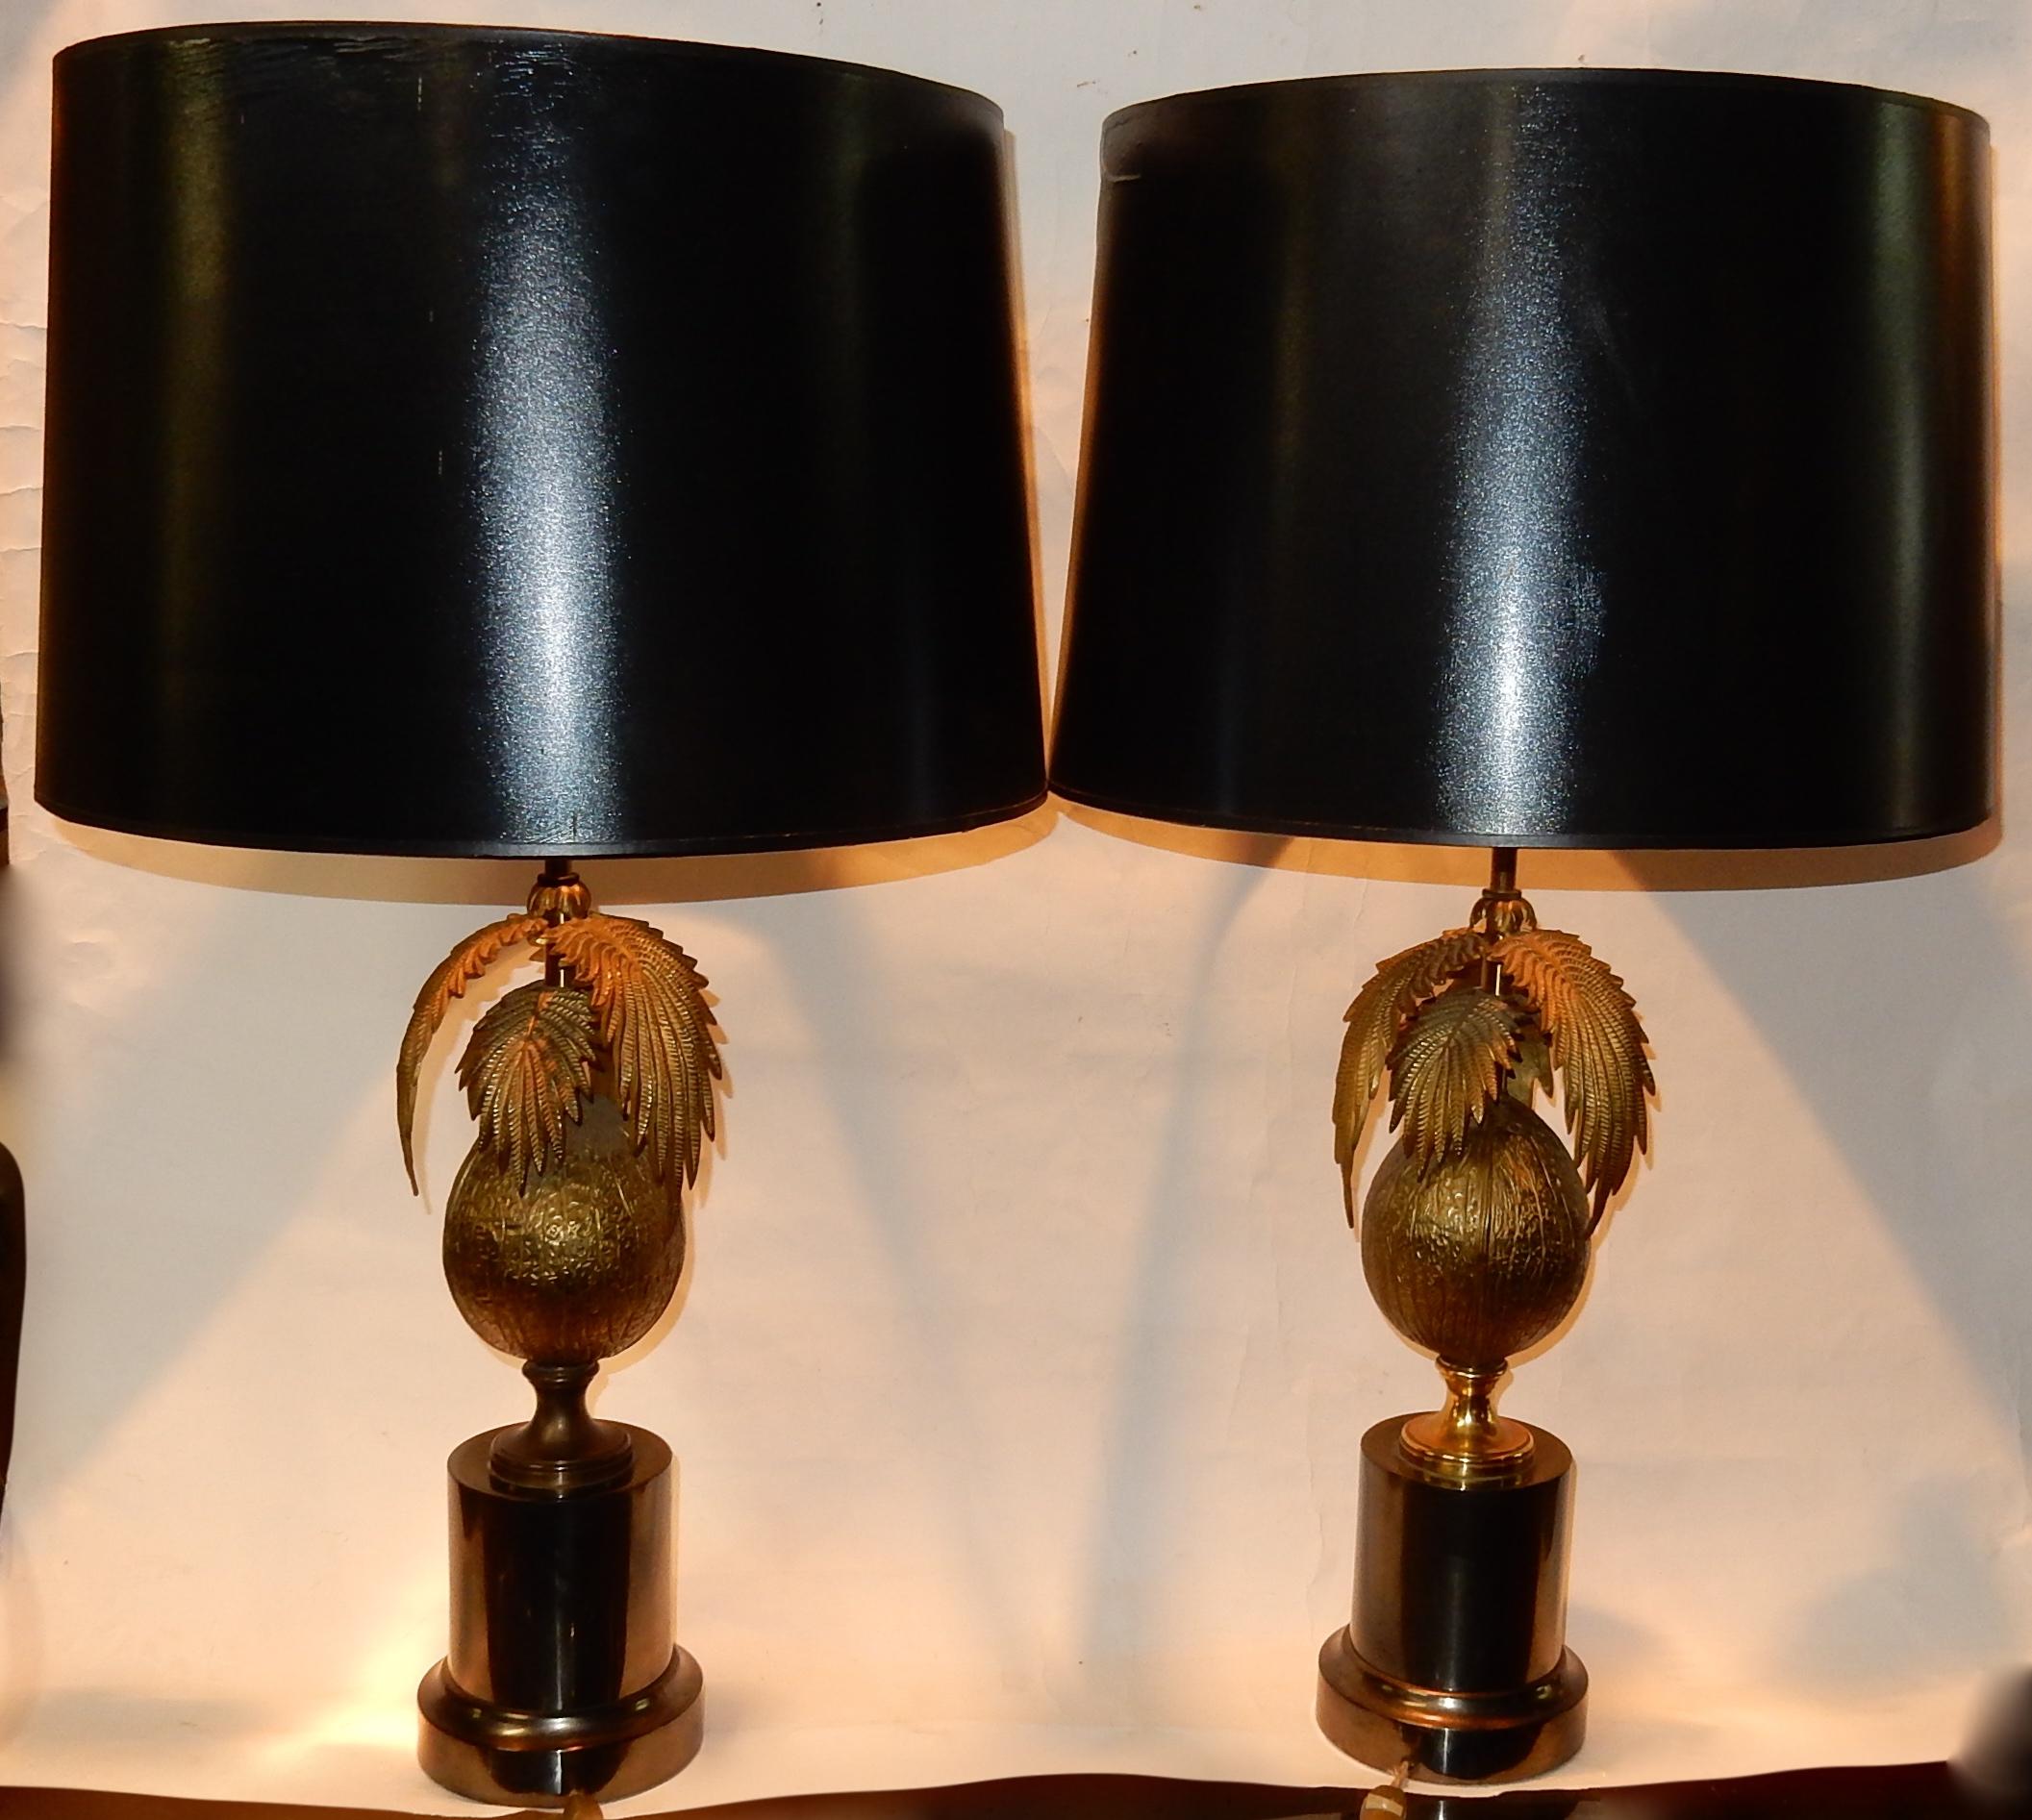 Pair of lamps in gilded and silvered bronze, base diameter 14 cm adjustable height: 87 cm Maxi and 72 cm Mini model of Charles or Maison Jansen all in bronze
Height: 87 cm
Diameter: 24 cm.